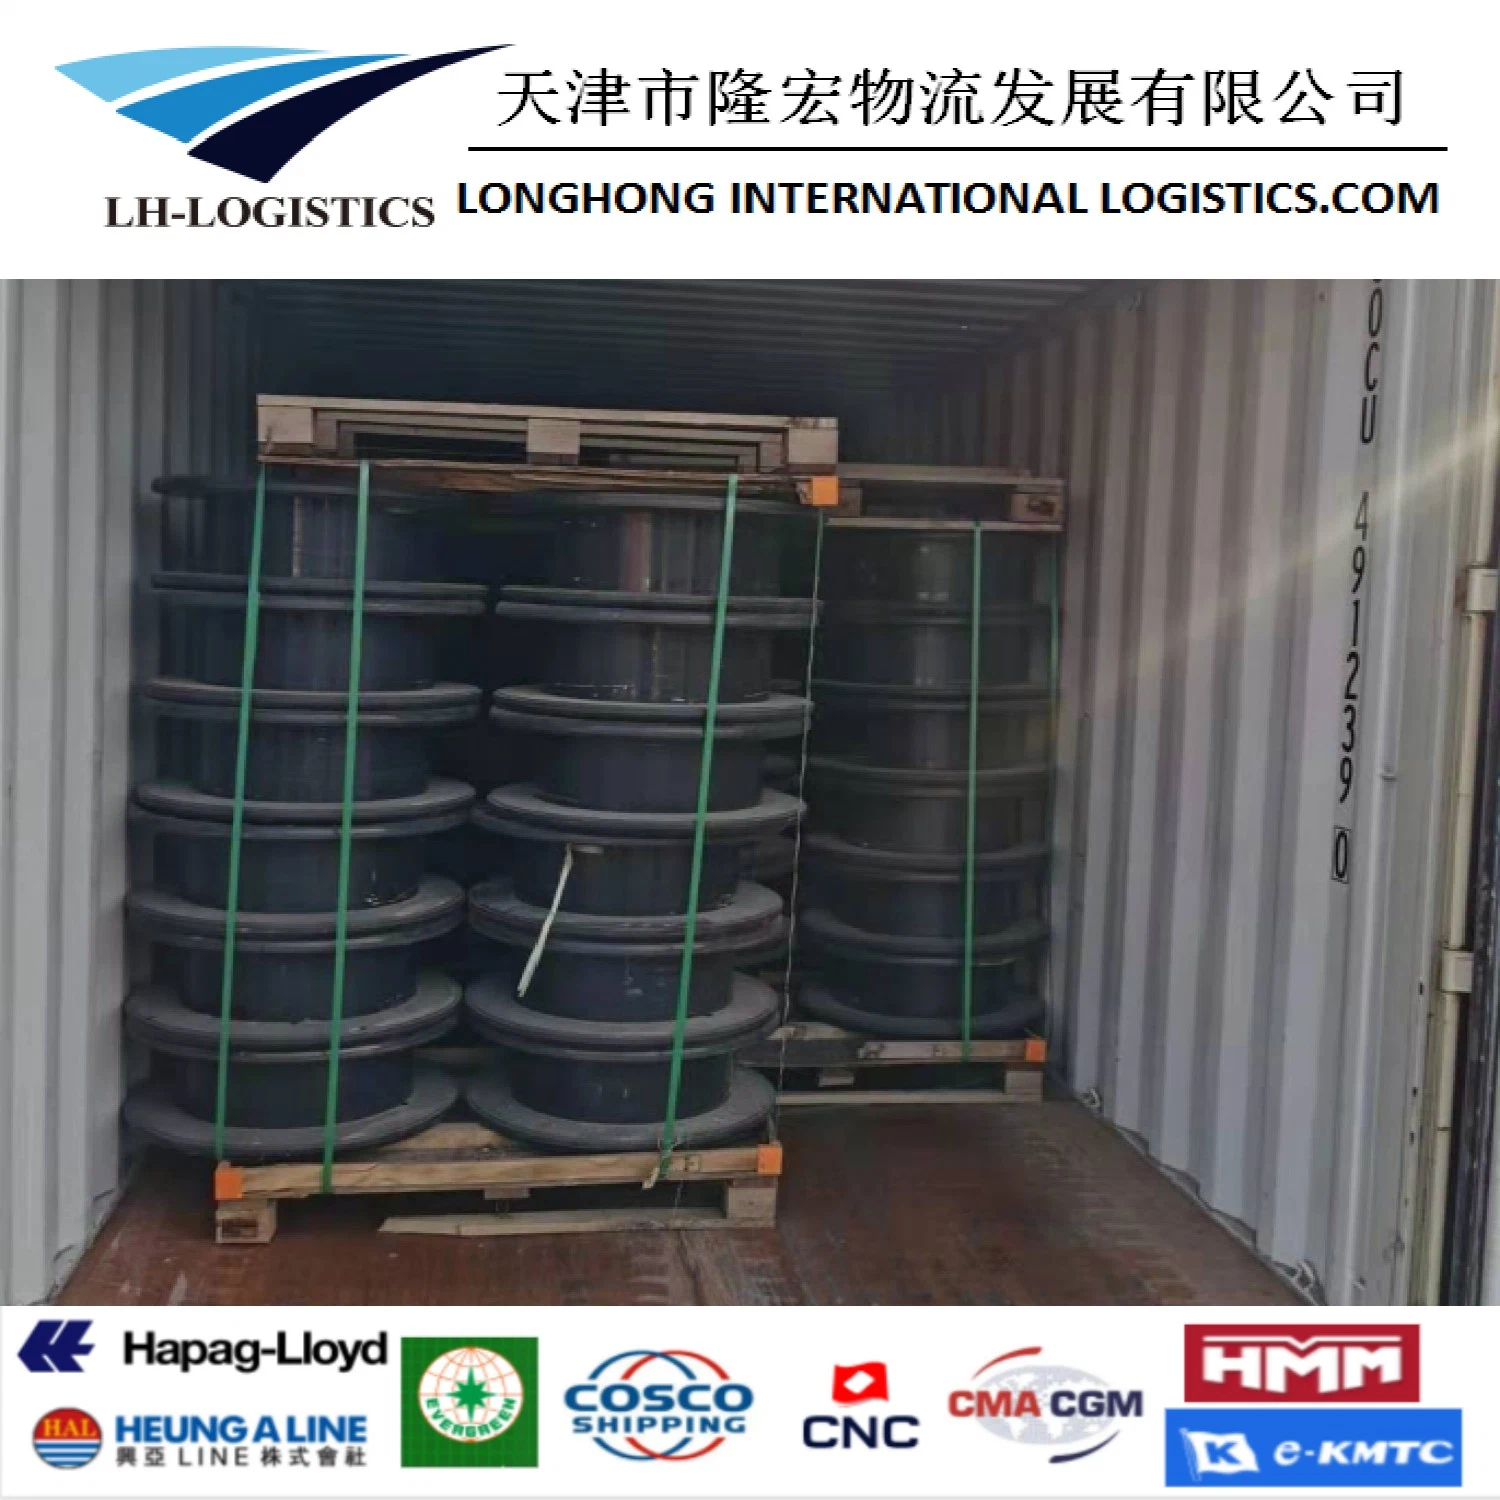 Professional Shipping Service From China to Ho Chi Minh, Southeast Asia. Sea Shipping Boat Logistics.